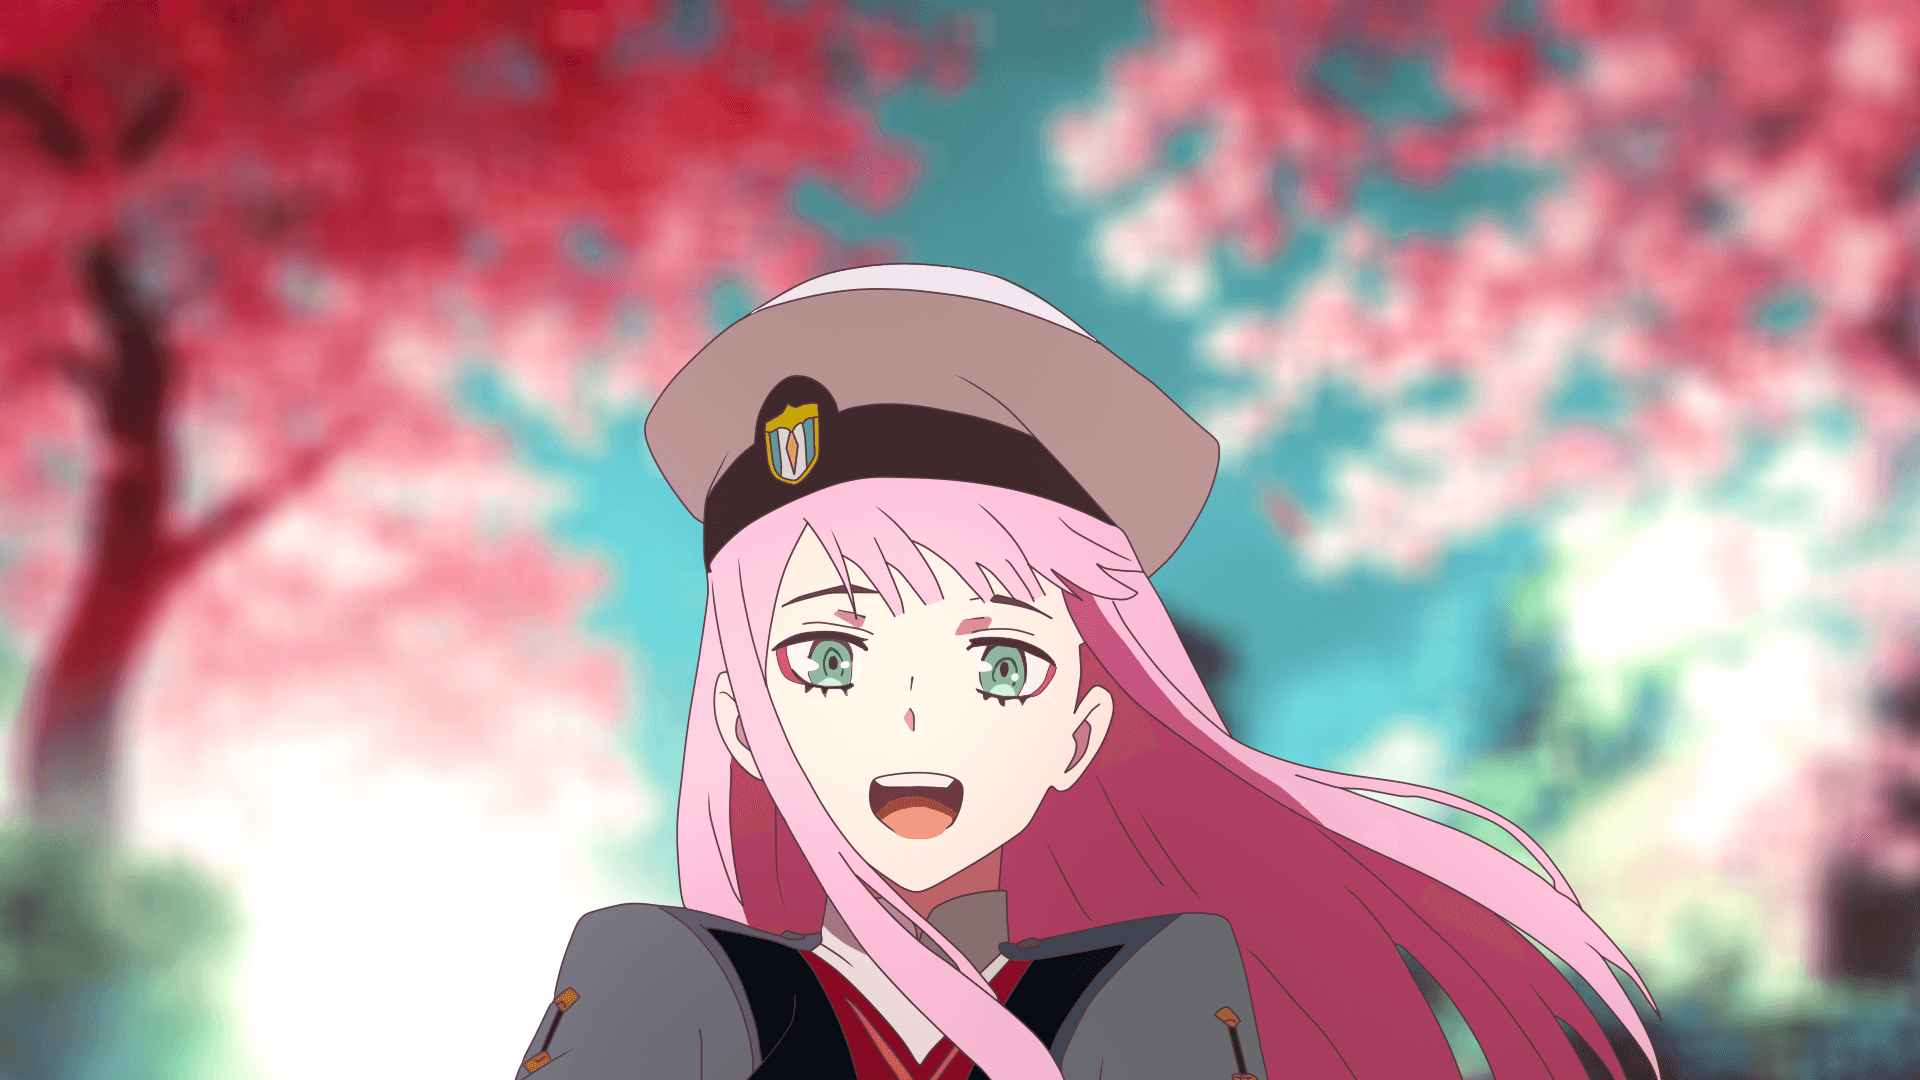 A captivating portrait of Zero Two, the beloved character from the hit anime series Darling in the FranXX